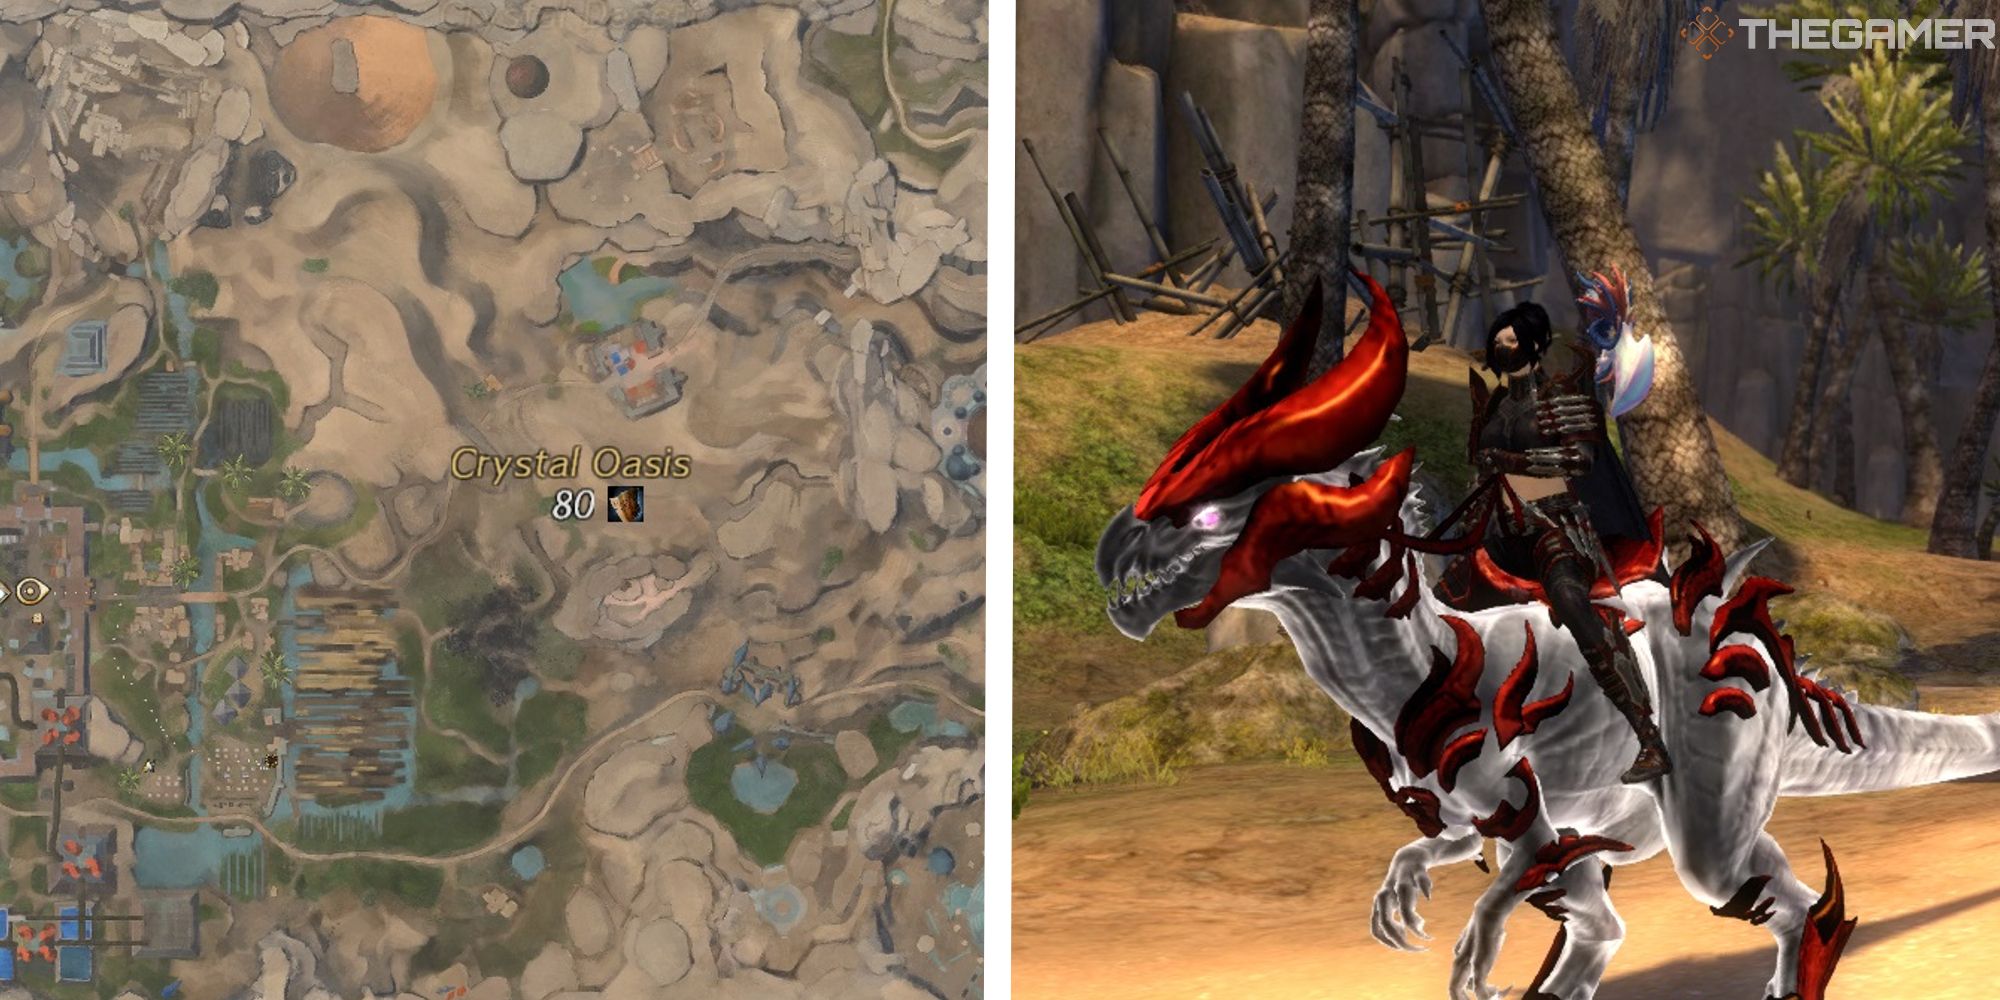 map of crystal oasis next to image of player on raptor mount